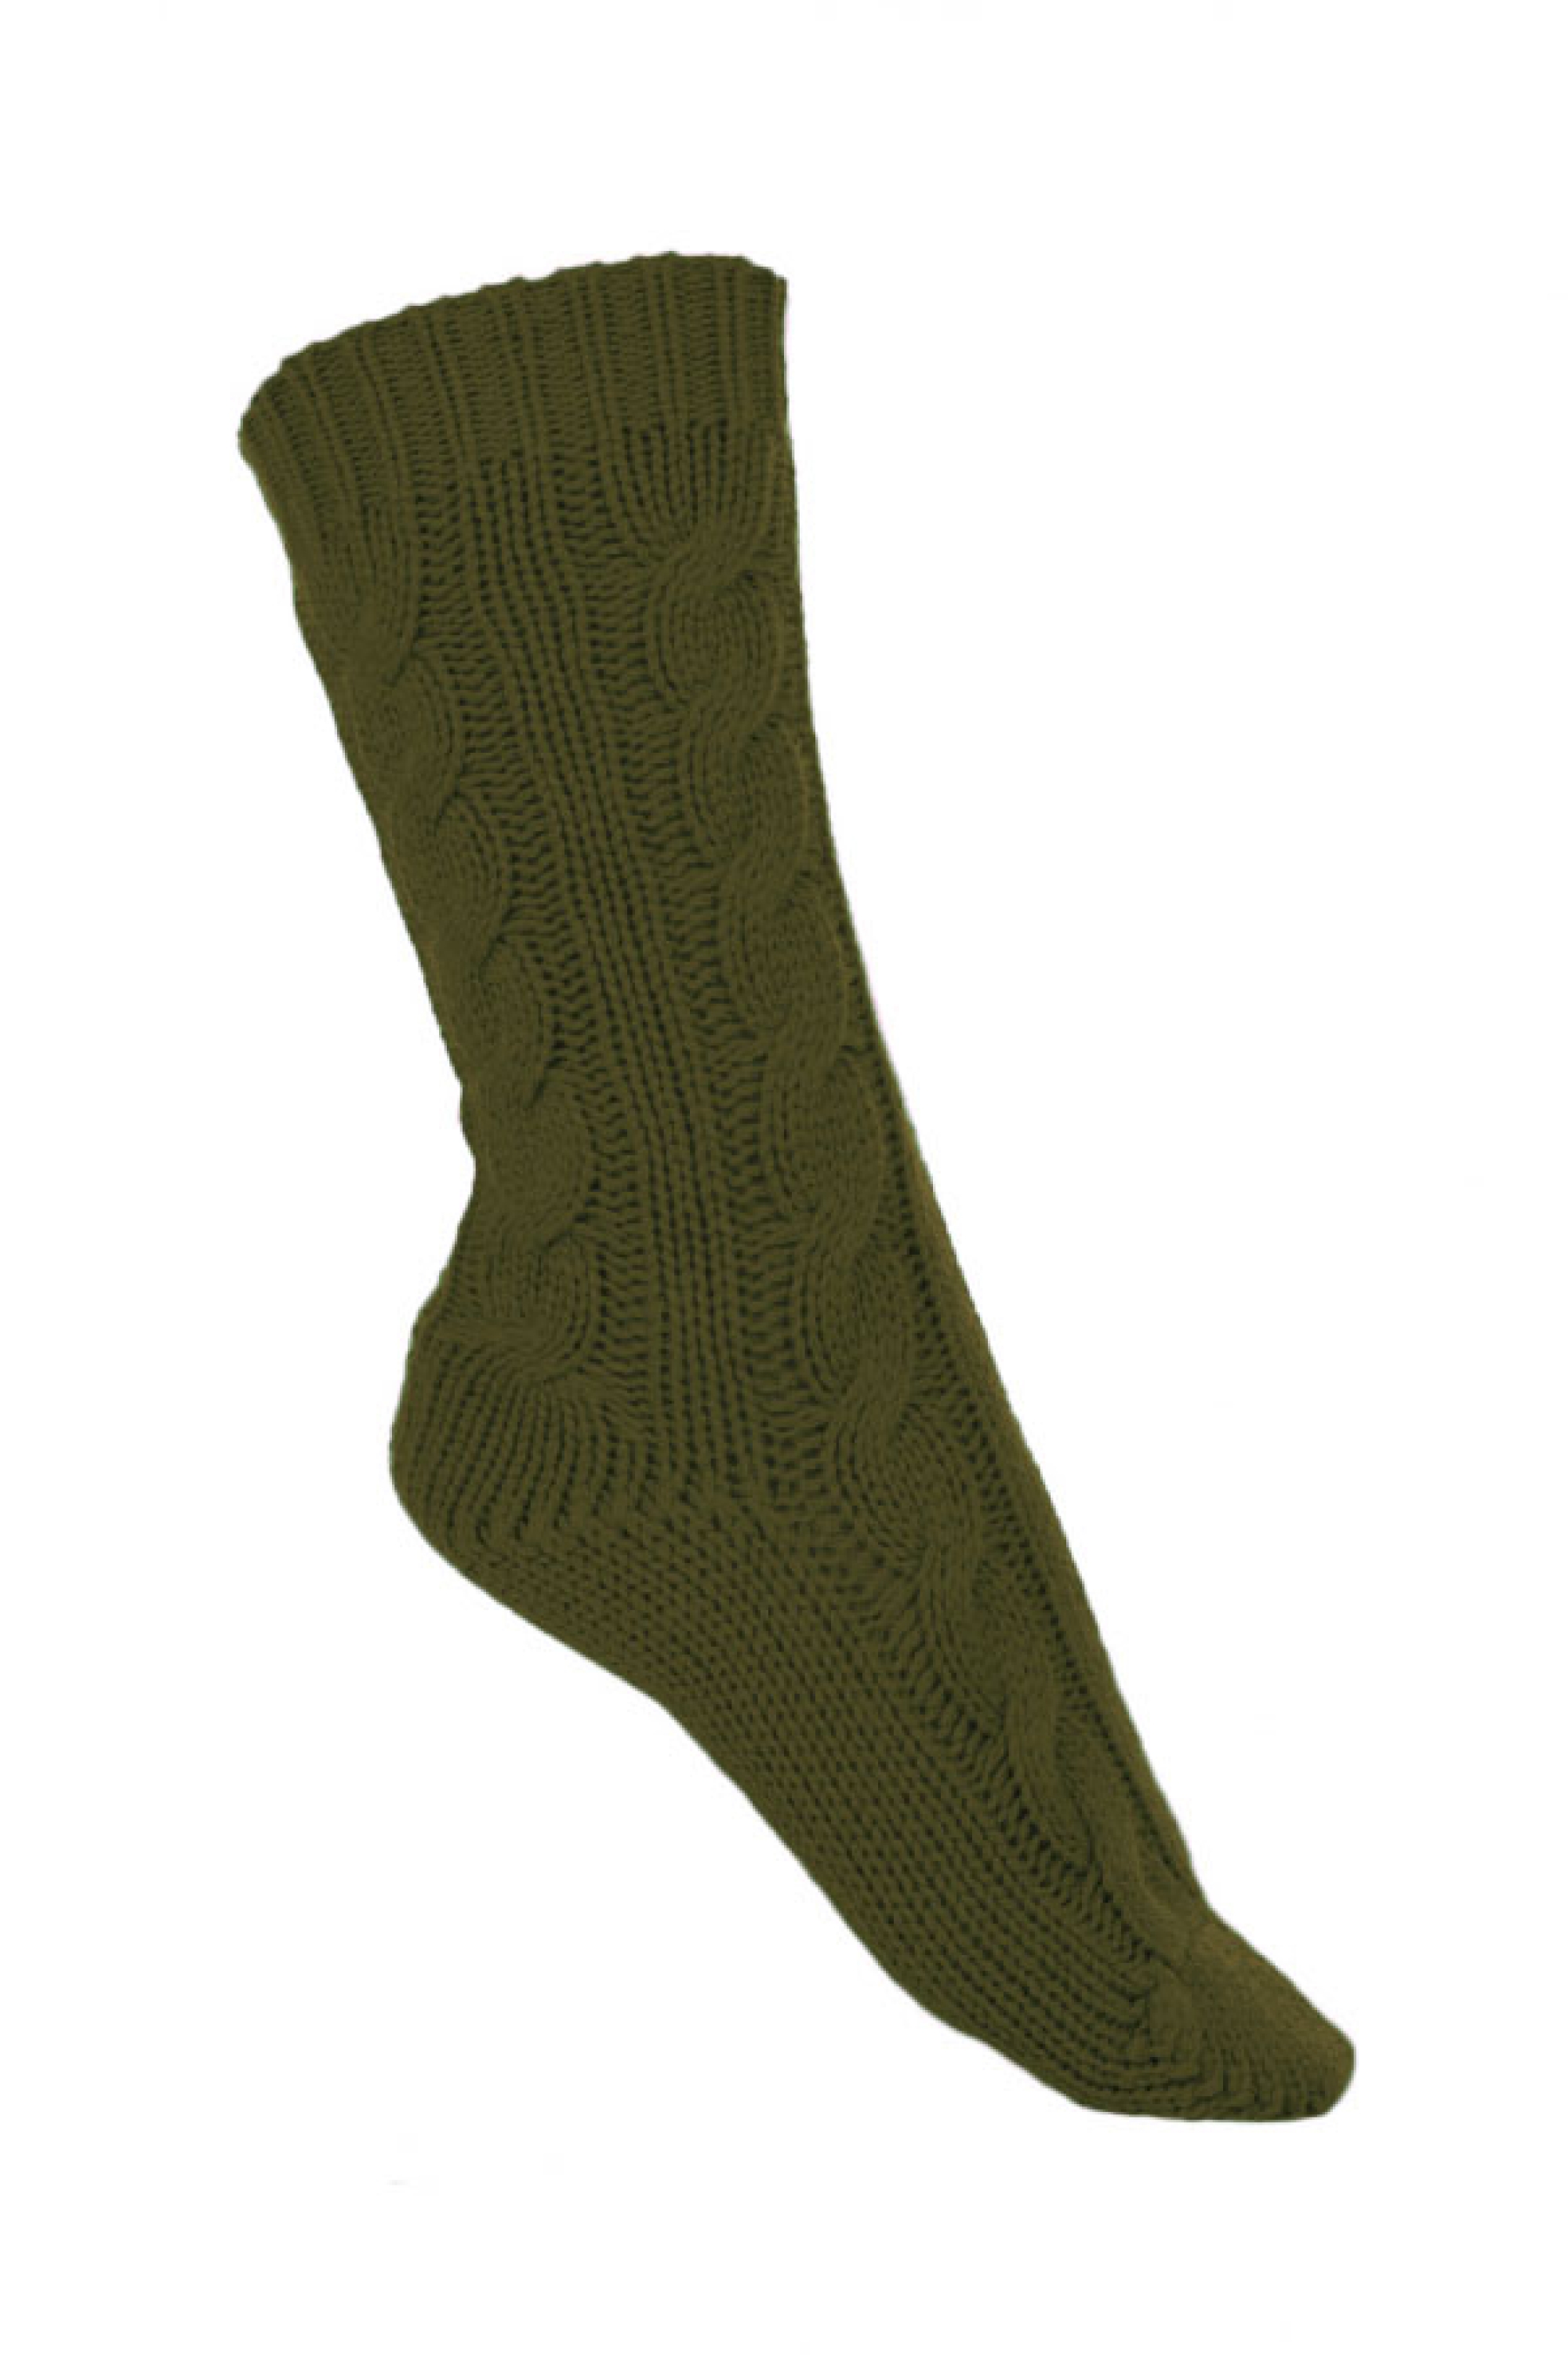 Cashmere accessories cocooning pedibus ivy green 37 41